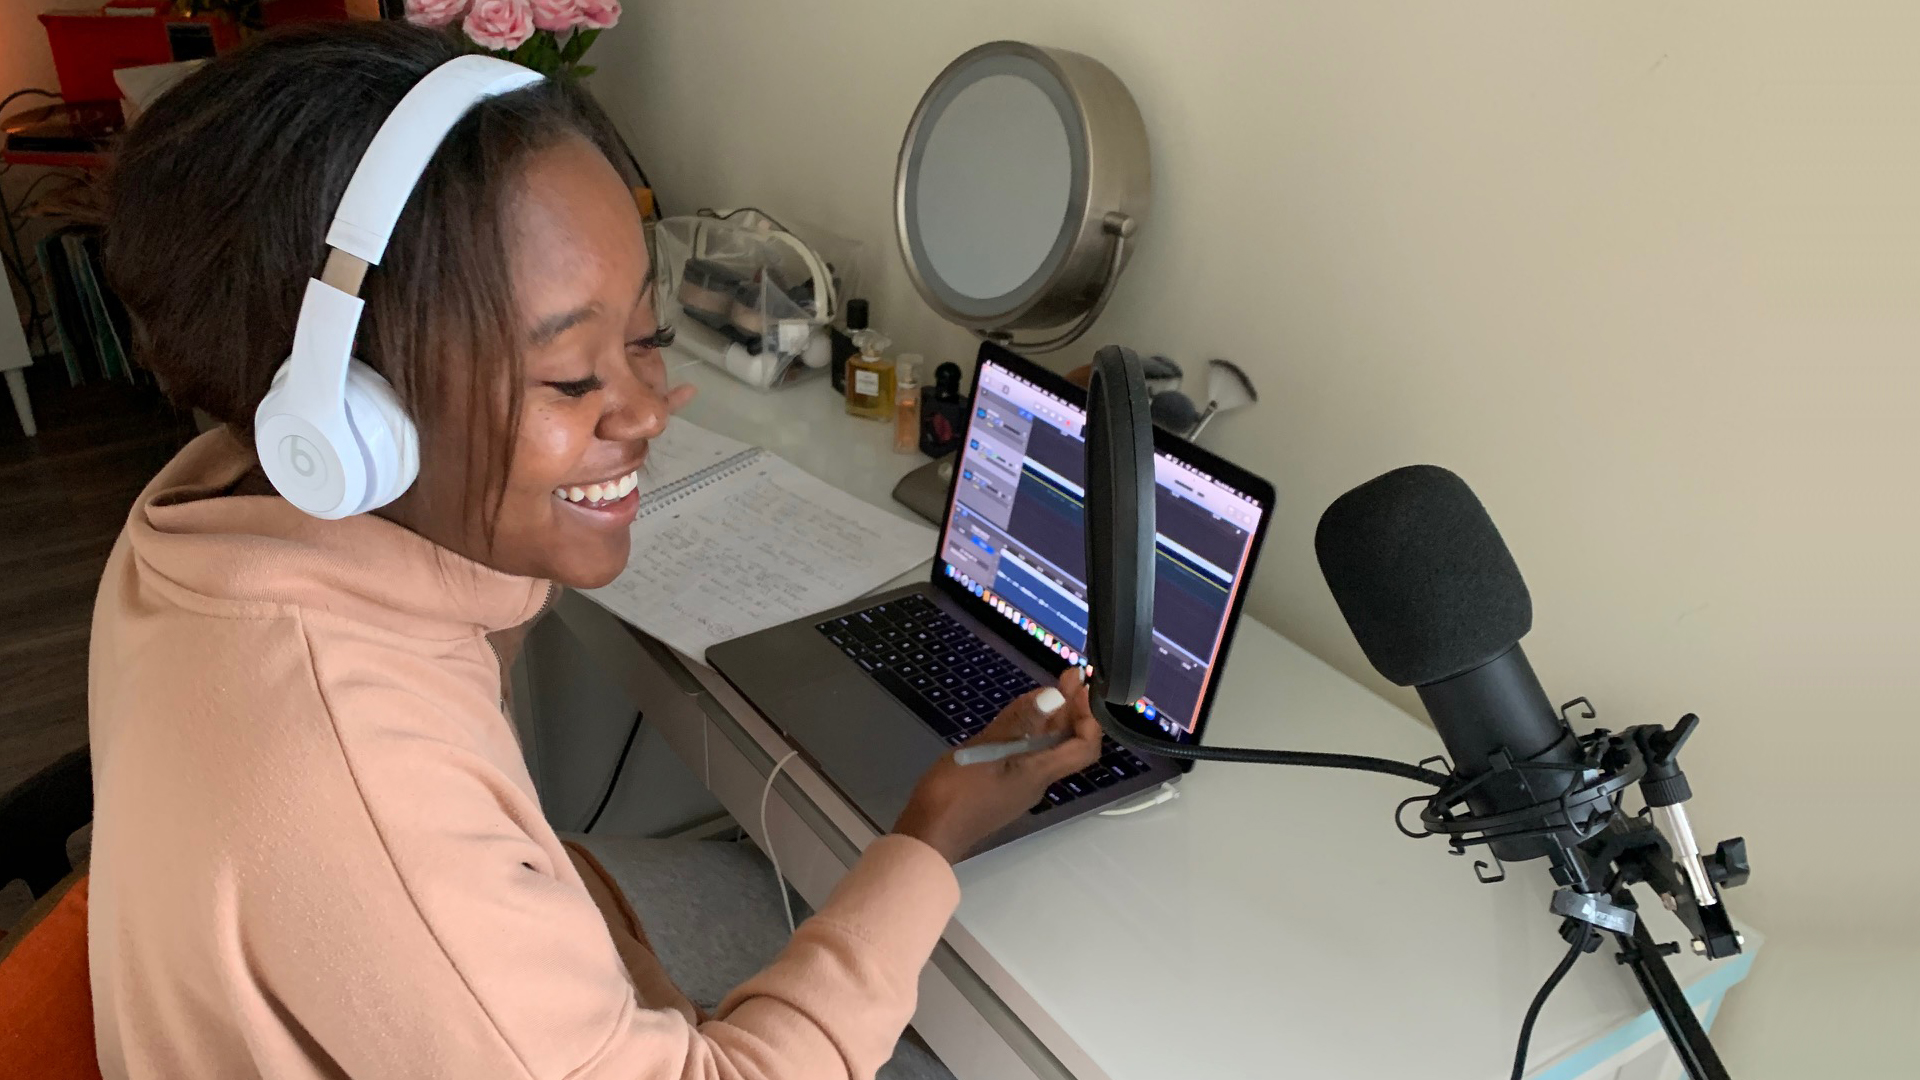 Young woman sitting at a table with her laptop open, while recording a podcast. She has headphones on and is speaking into a microphone.